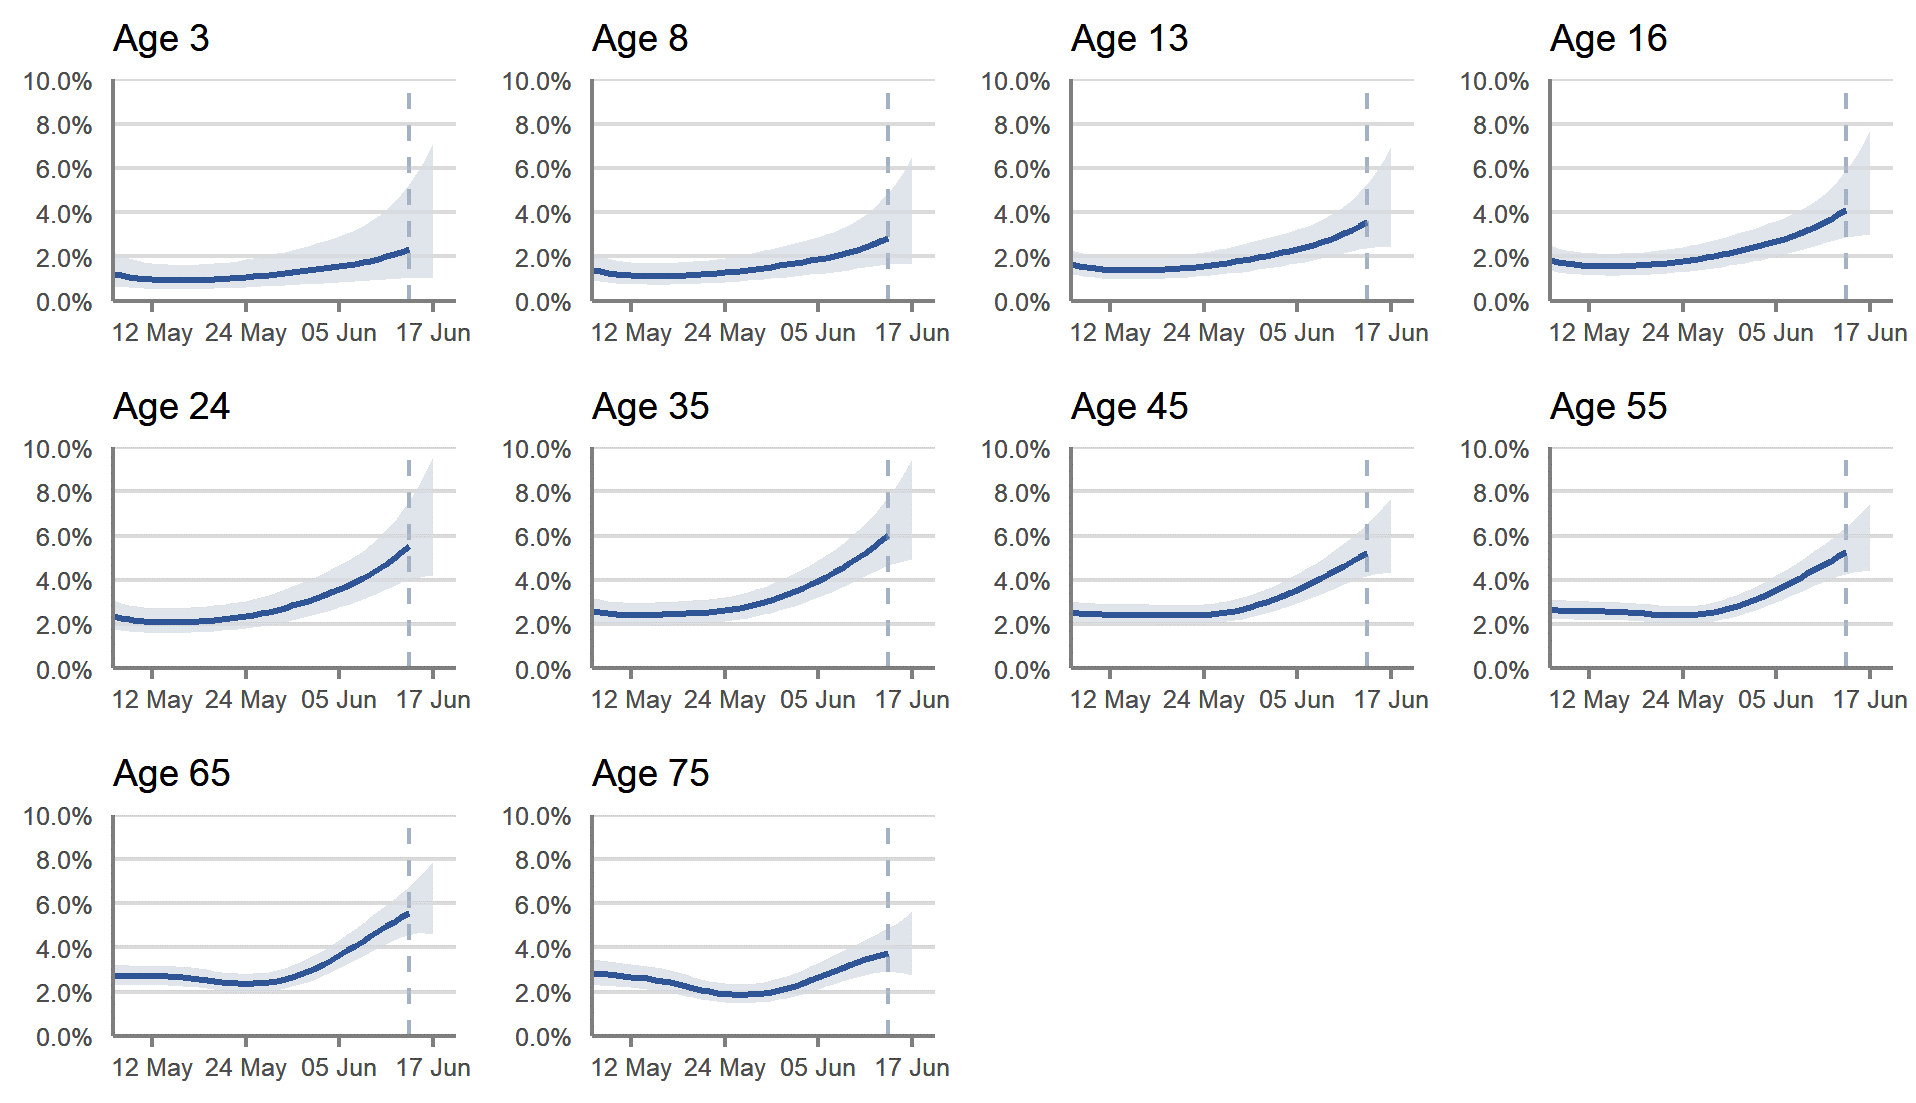 Figure 3: Modelled daily estimates of the percentage of the population in Scotland testing positive for COVID-19, by reference age, between 7 May to 17 June 2022, including 95% confidence intervals    A set of ten line charts showing modelled daily estimates of the percentage of the population in Scotland testing positive for COVID-19 for those of age 3, 8, 13, 16, 24, 35, 45, 55, 65 and 75 years of age, between 7 May and 17 June 2022. Modelled daily estimates are represented by a blue line with 95% credible intervals in pale blue shading. A vertical dashed line near the end of the series indicating greater uncertainty in estimates for the last three reported days. In recent weeks, the estimated percentage of people testing positive for COVID-19 increased for most ages.